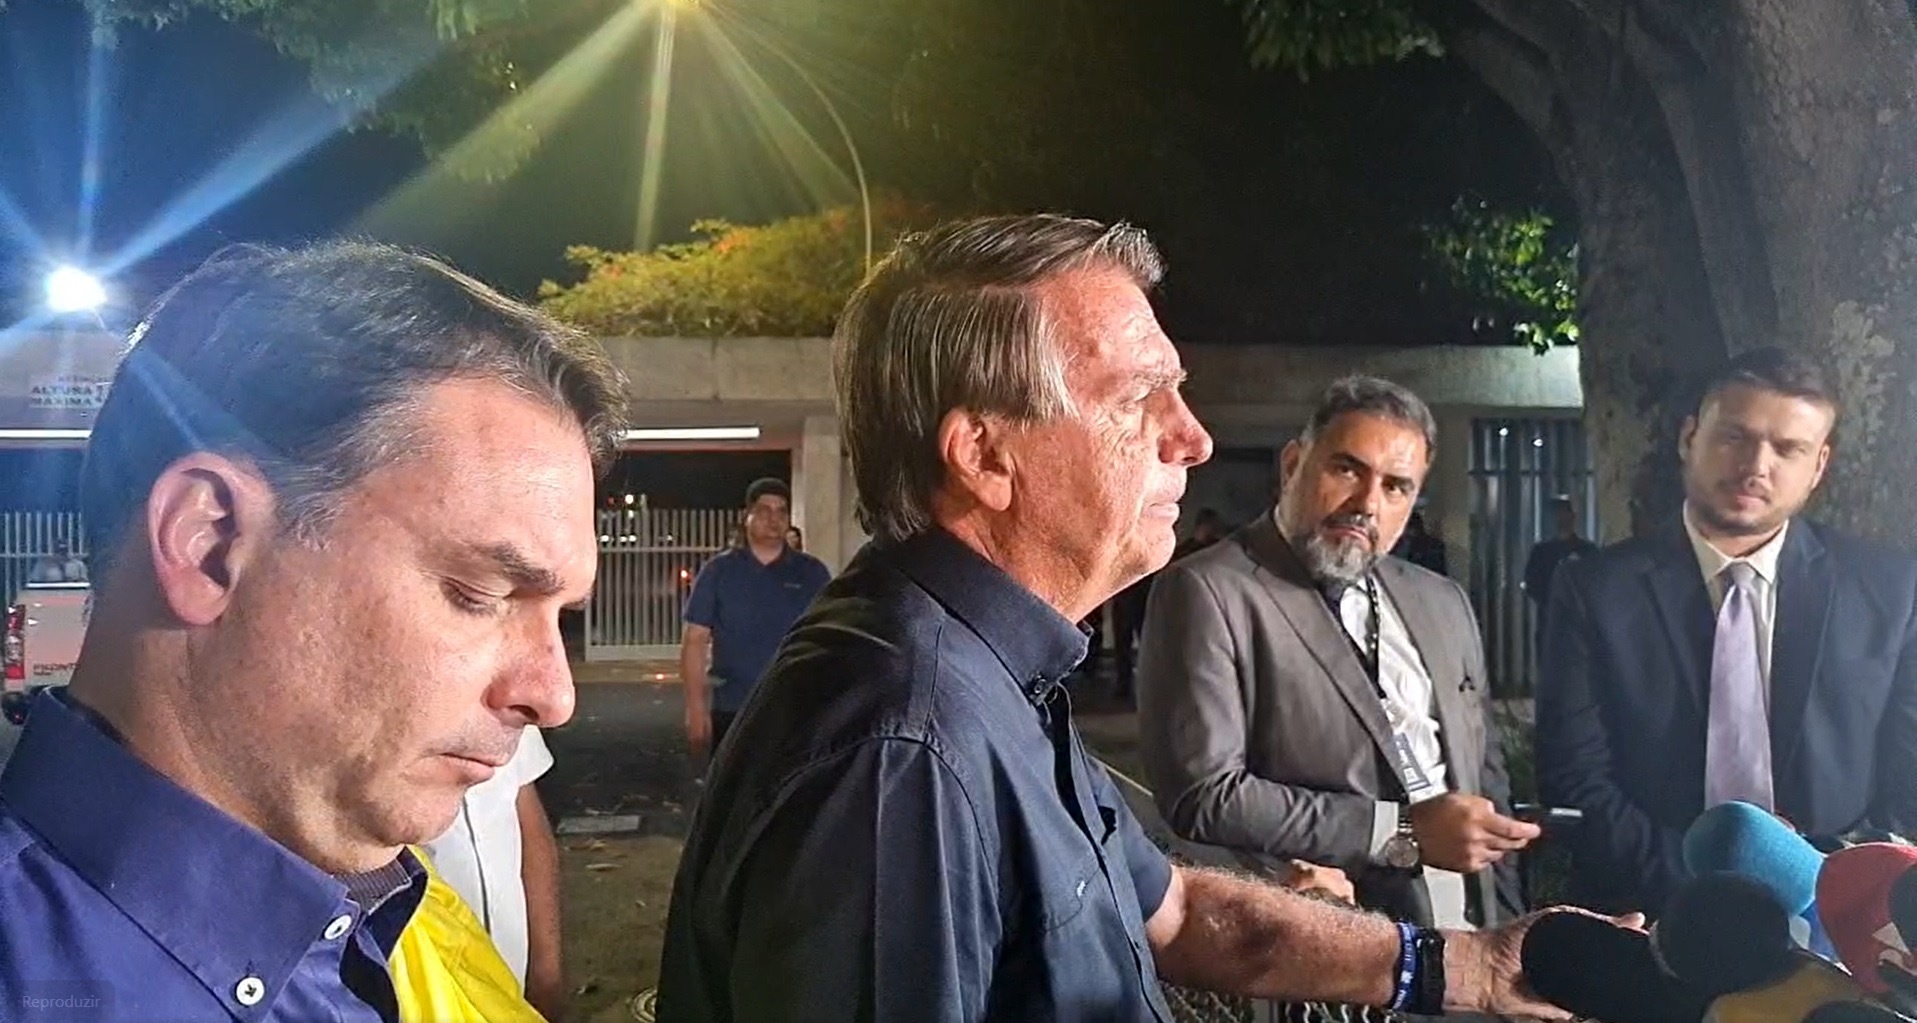 Bolsonaro said he’d await a military review of votes before commenting on fairness of electoral process